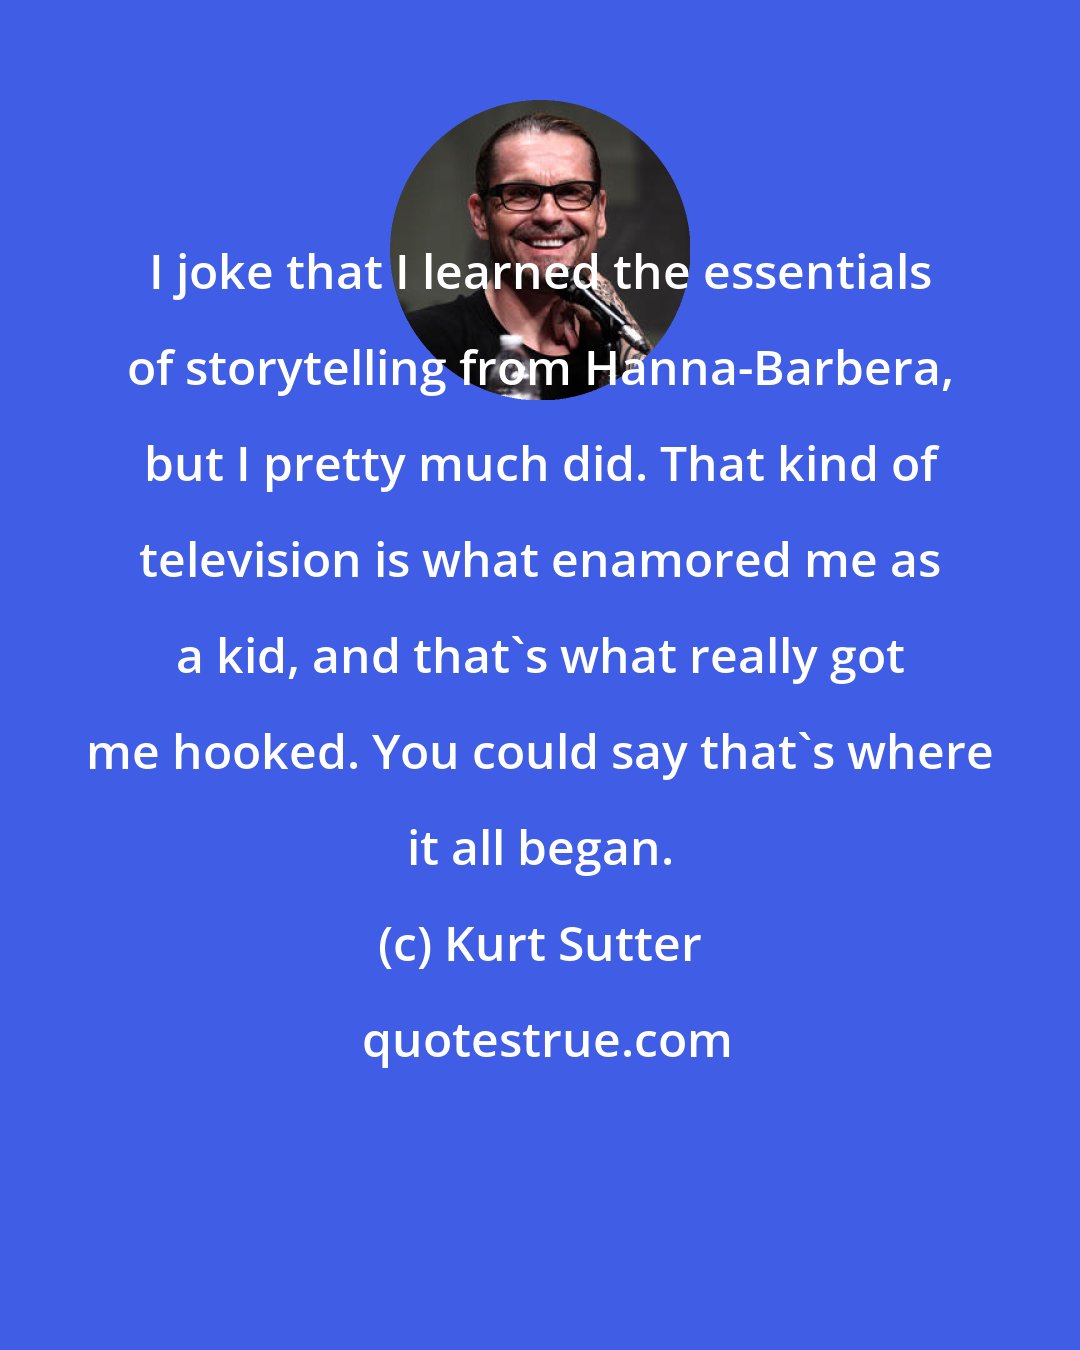 Kurt Sutter: I joke that I learned the essentials of storytelling from Hanna-Barbera, but I pretty much did. That kind of television is what enamored me as a kid, and that's what really got me hooked. You could say that's where it all began.